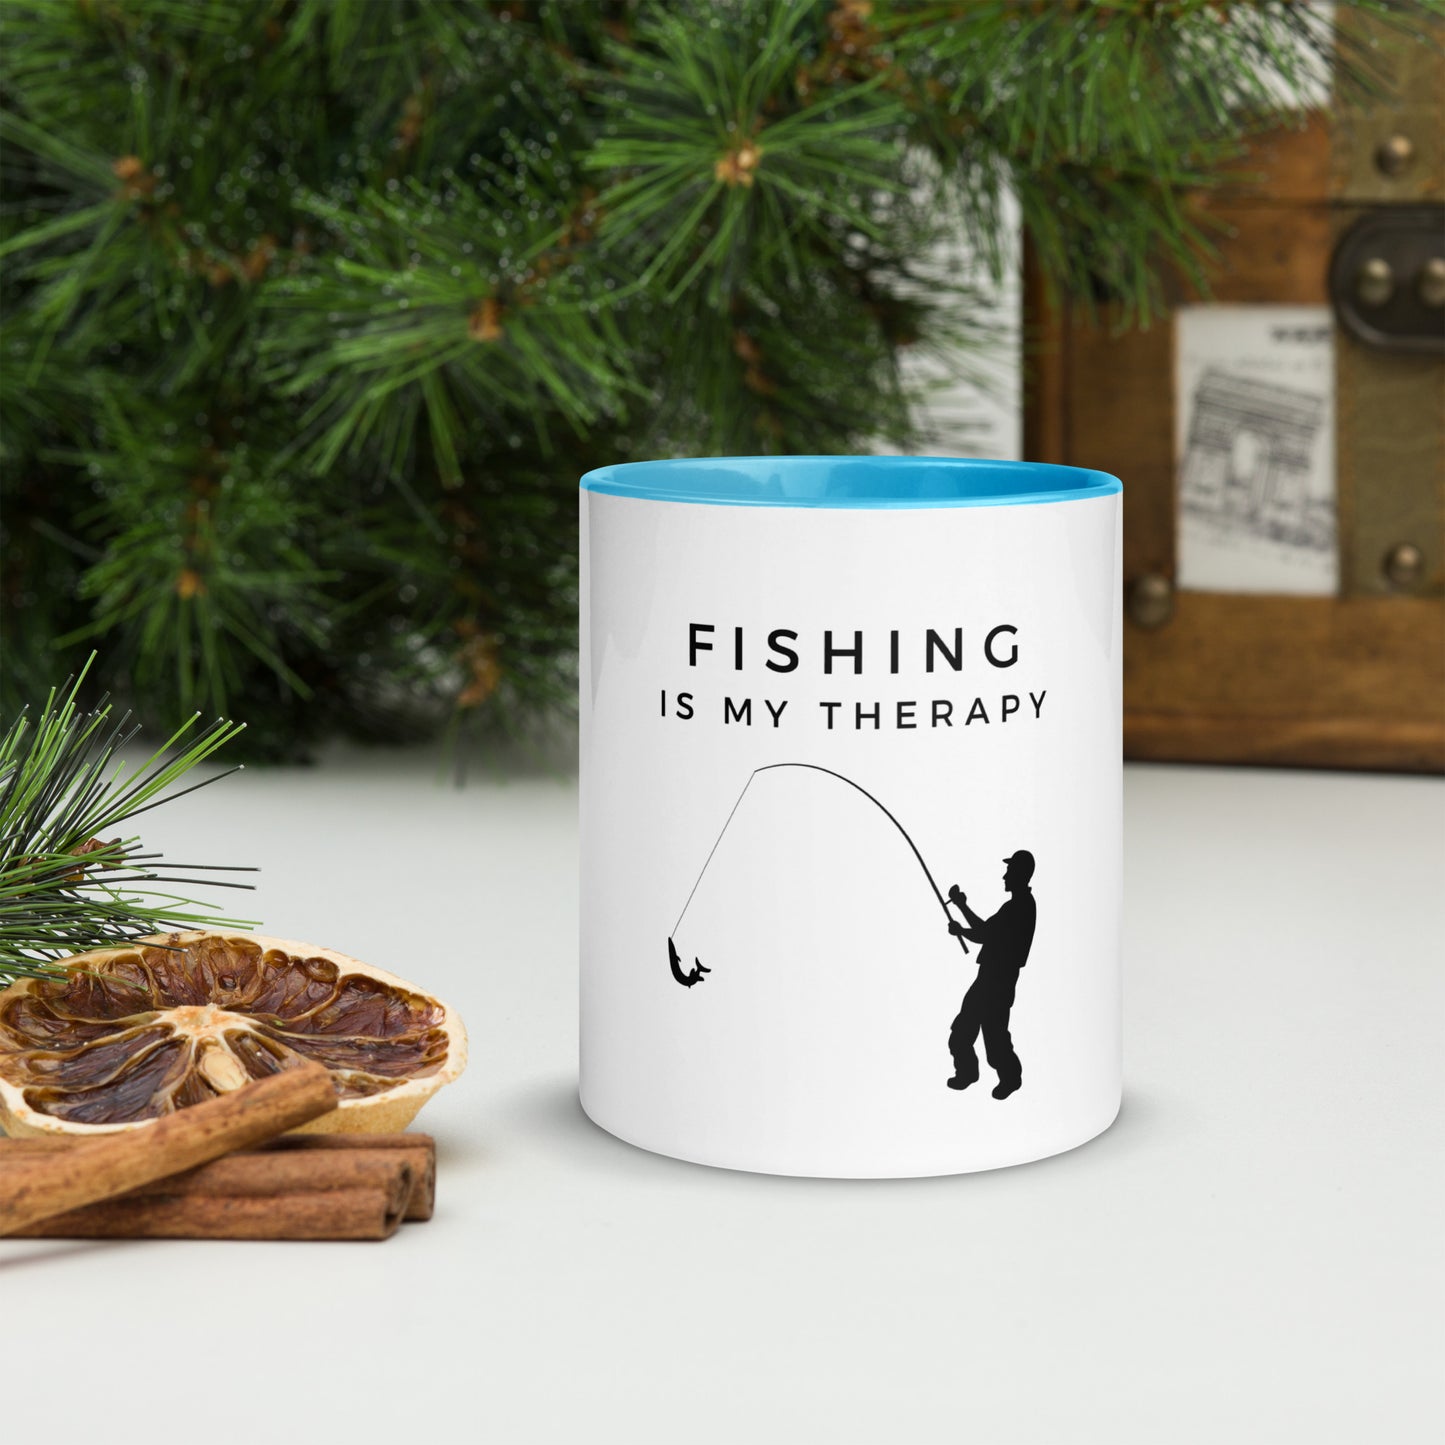 "Fishing Is My Therapy" Coffee Mug - Weave Got Gifts - Unique Gifts You Won’t Find Anywhere Else!